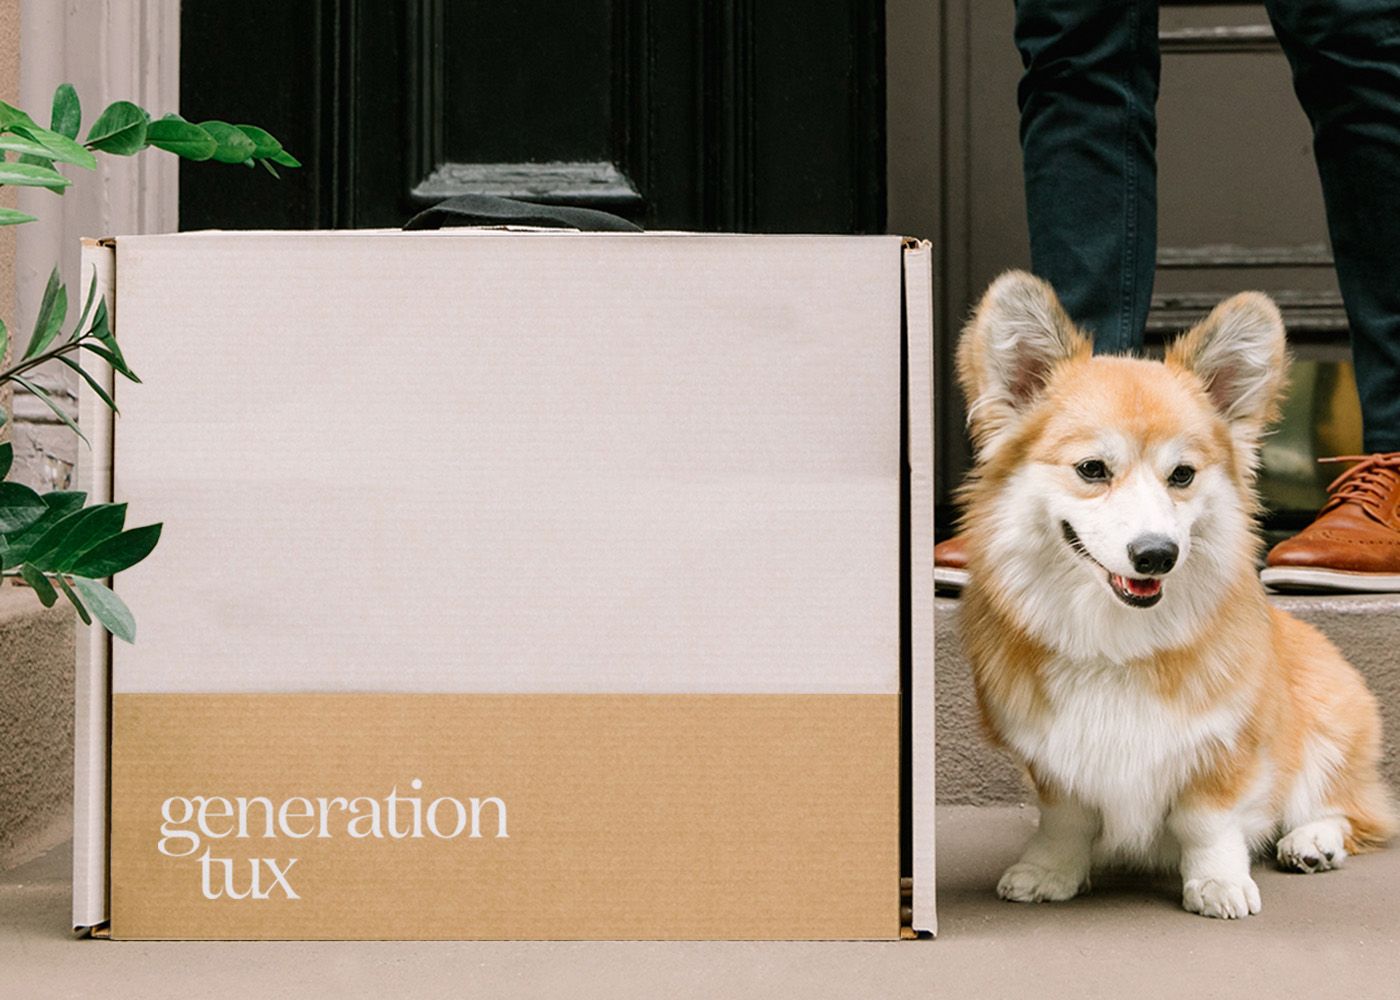 Generation Tux offers convenient delivery and returns of wedding suits